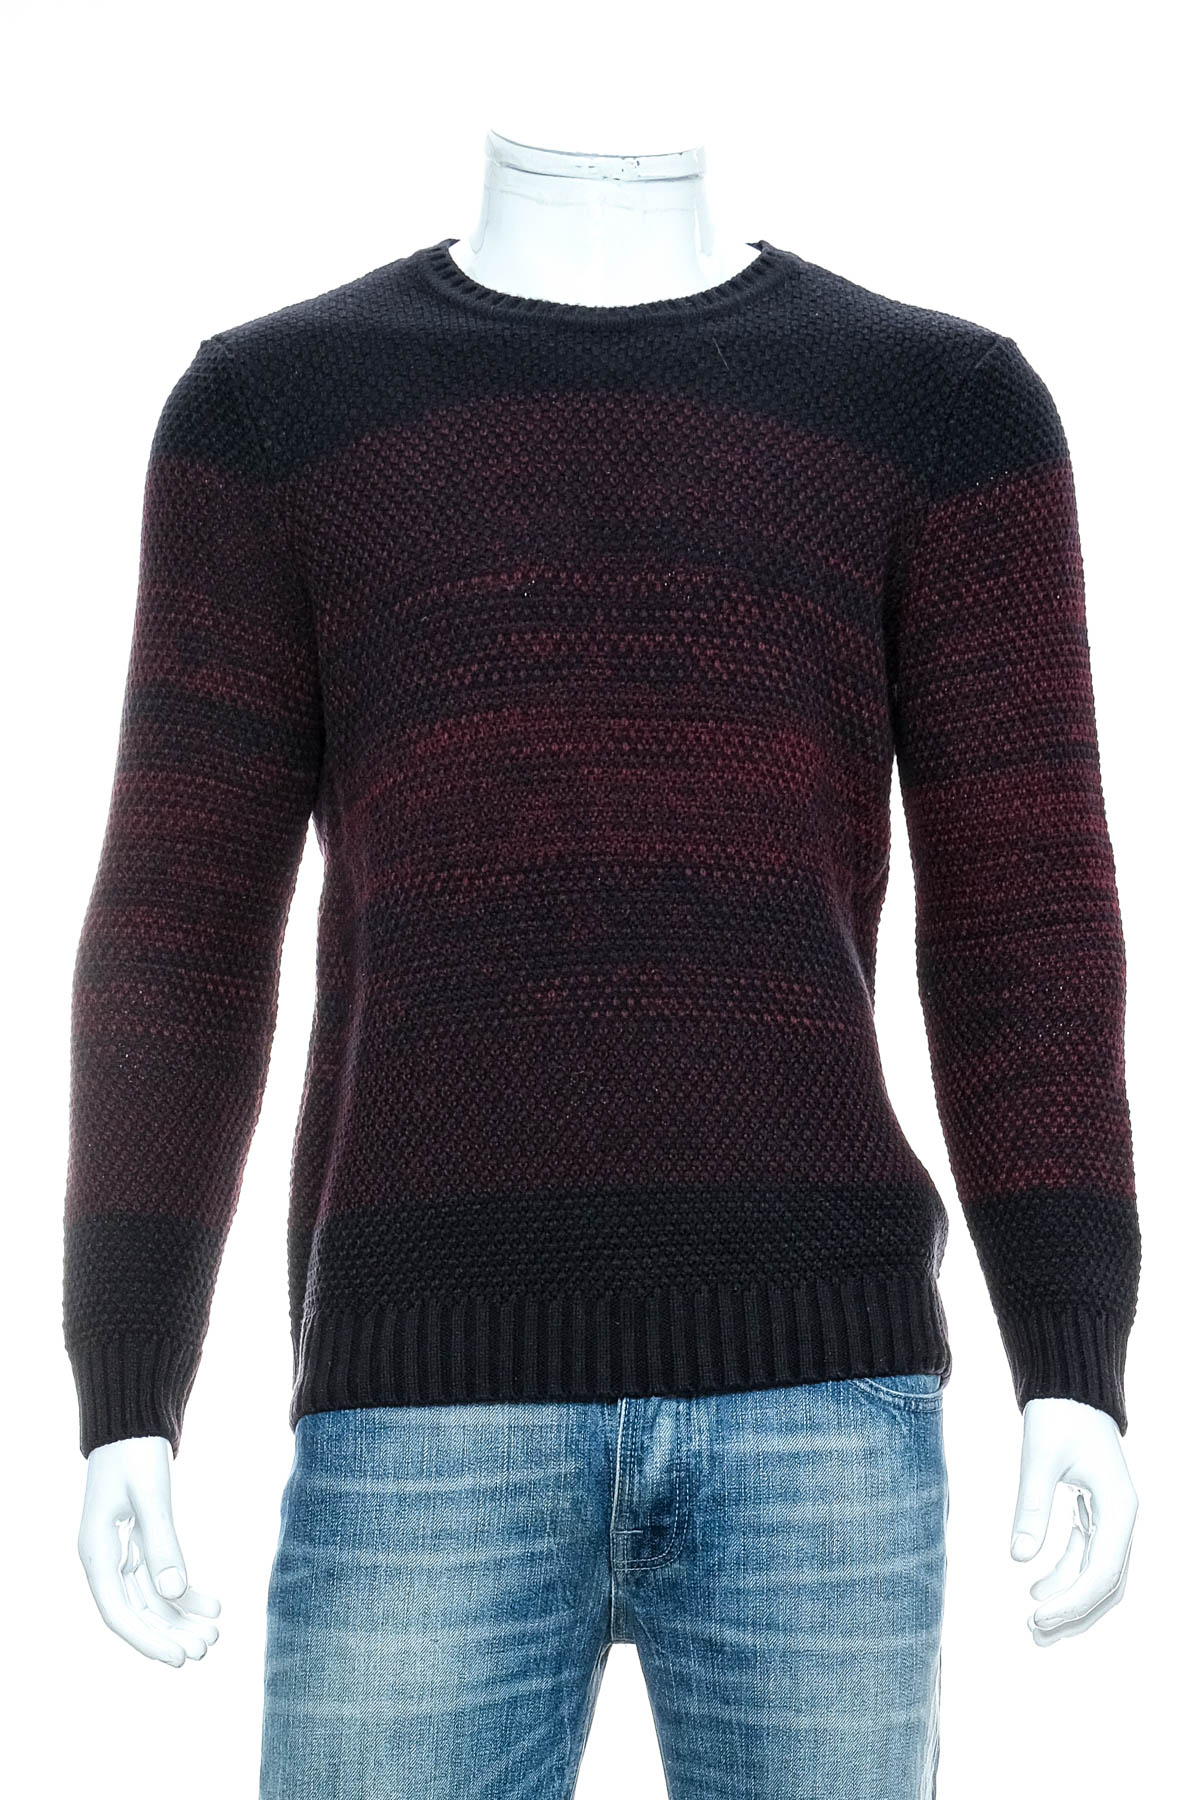 Men's sweater - LCW Casual - 0